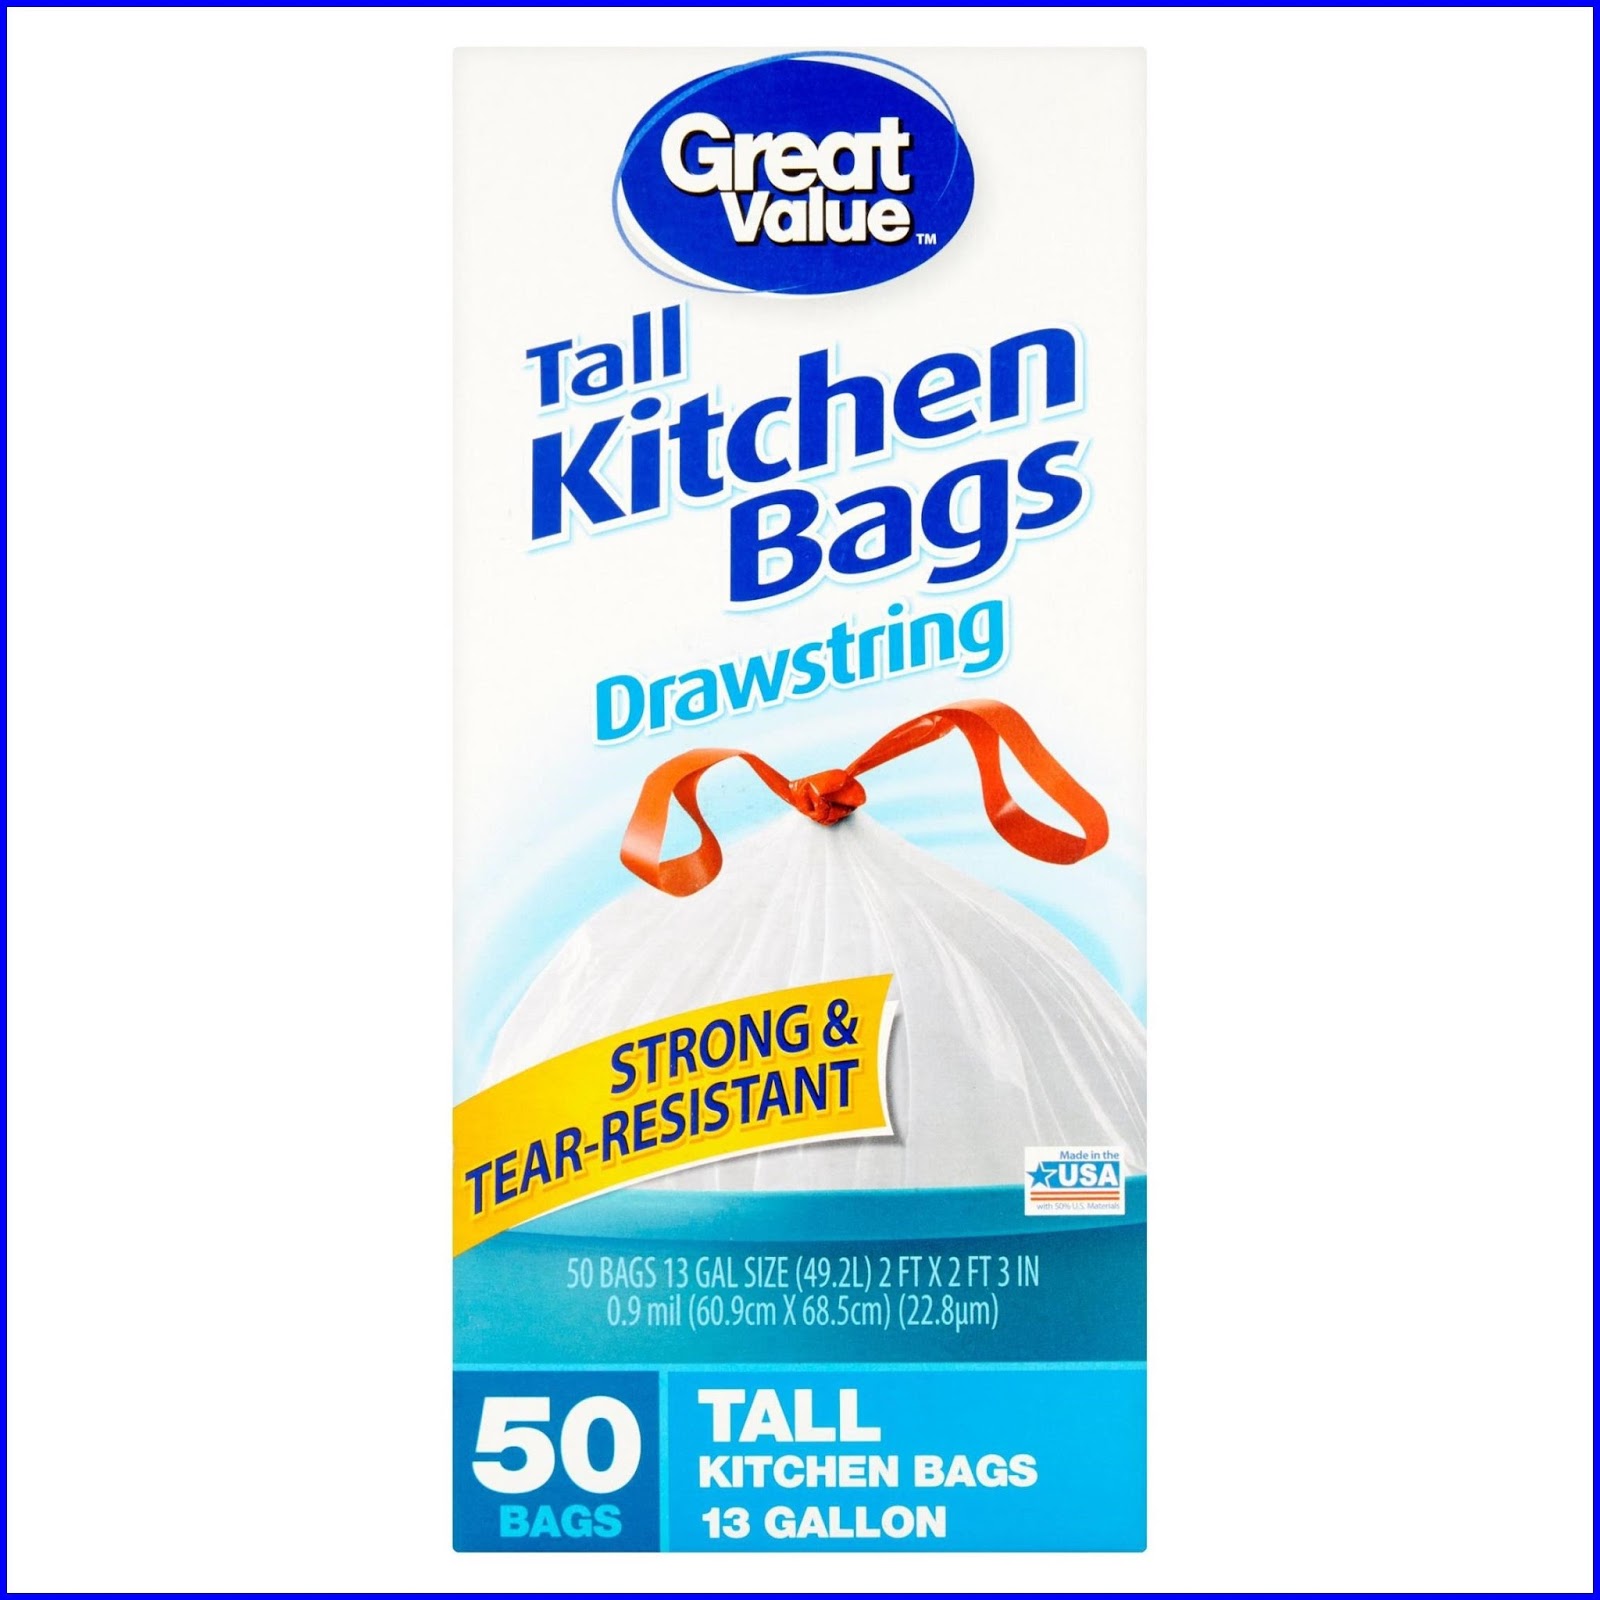 19 Tall Kitchen Bags Size Great Value Drawstring Tall Kitchen Bags gal count  Tall,Kitchen,Bags,Size